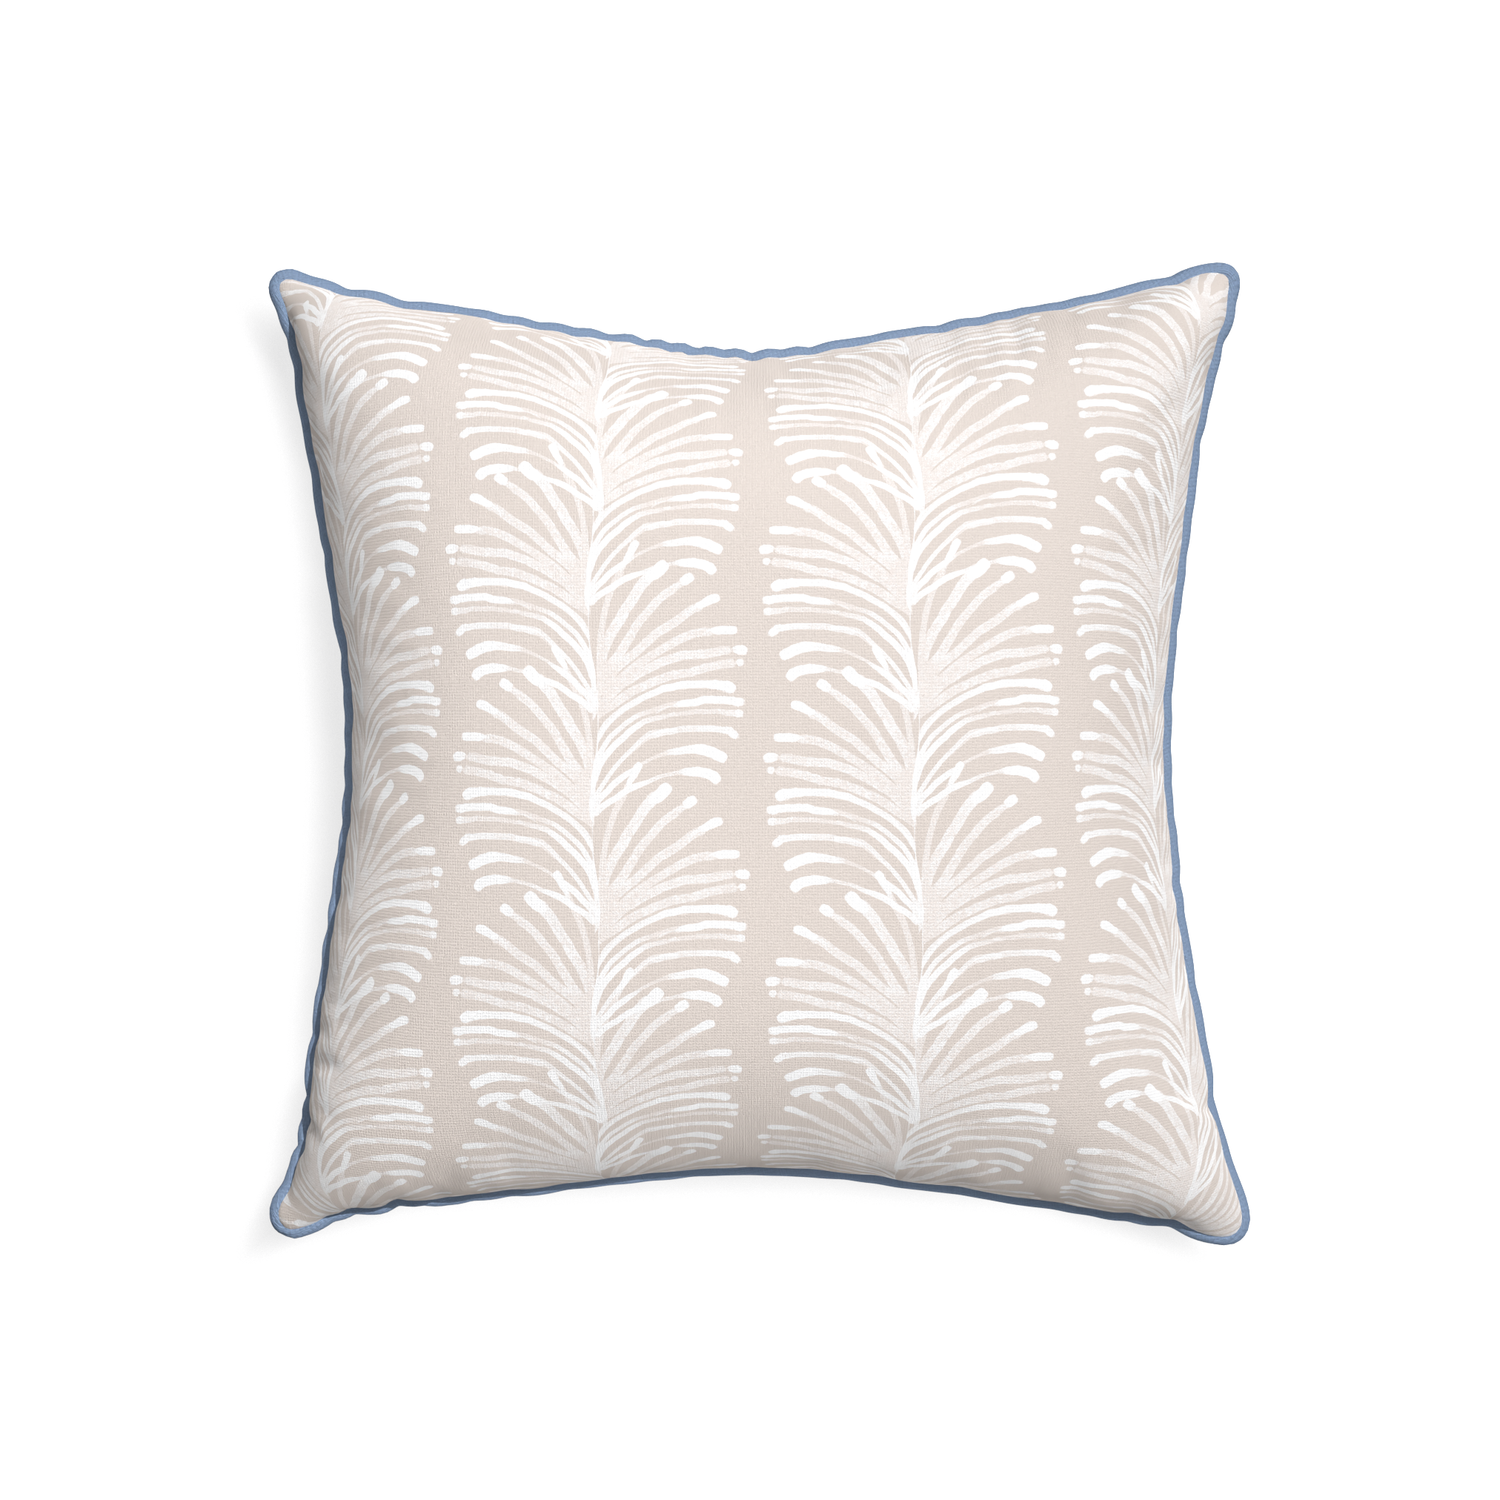 22-square emma sand custom sand colored botanical stripepillow with sky piping on white background